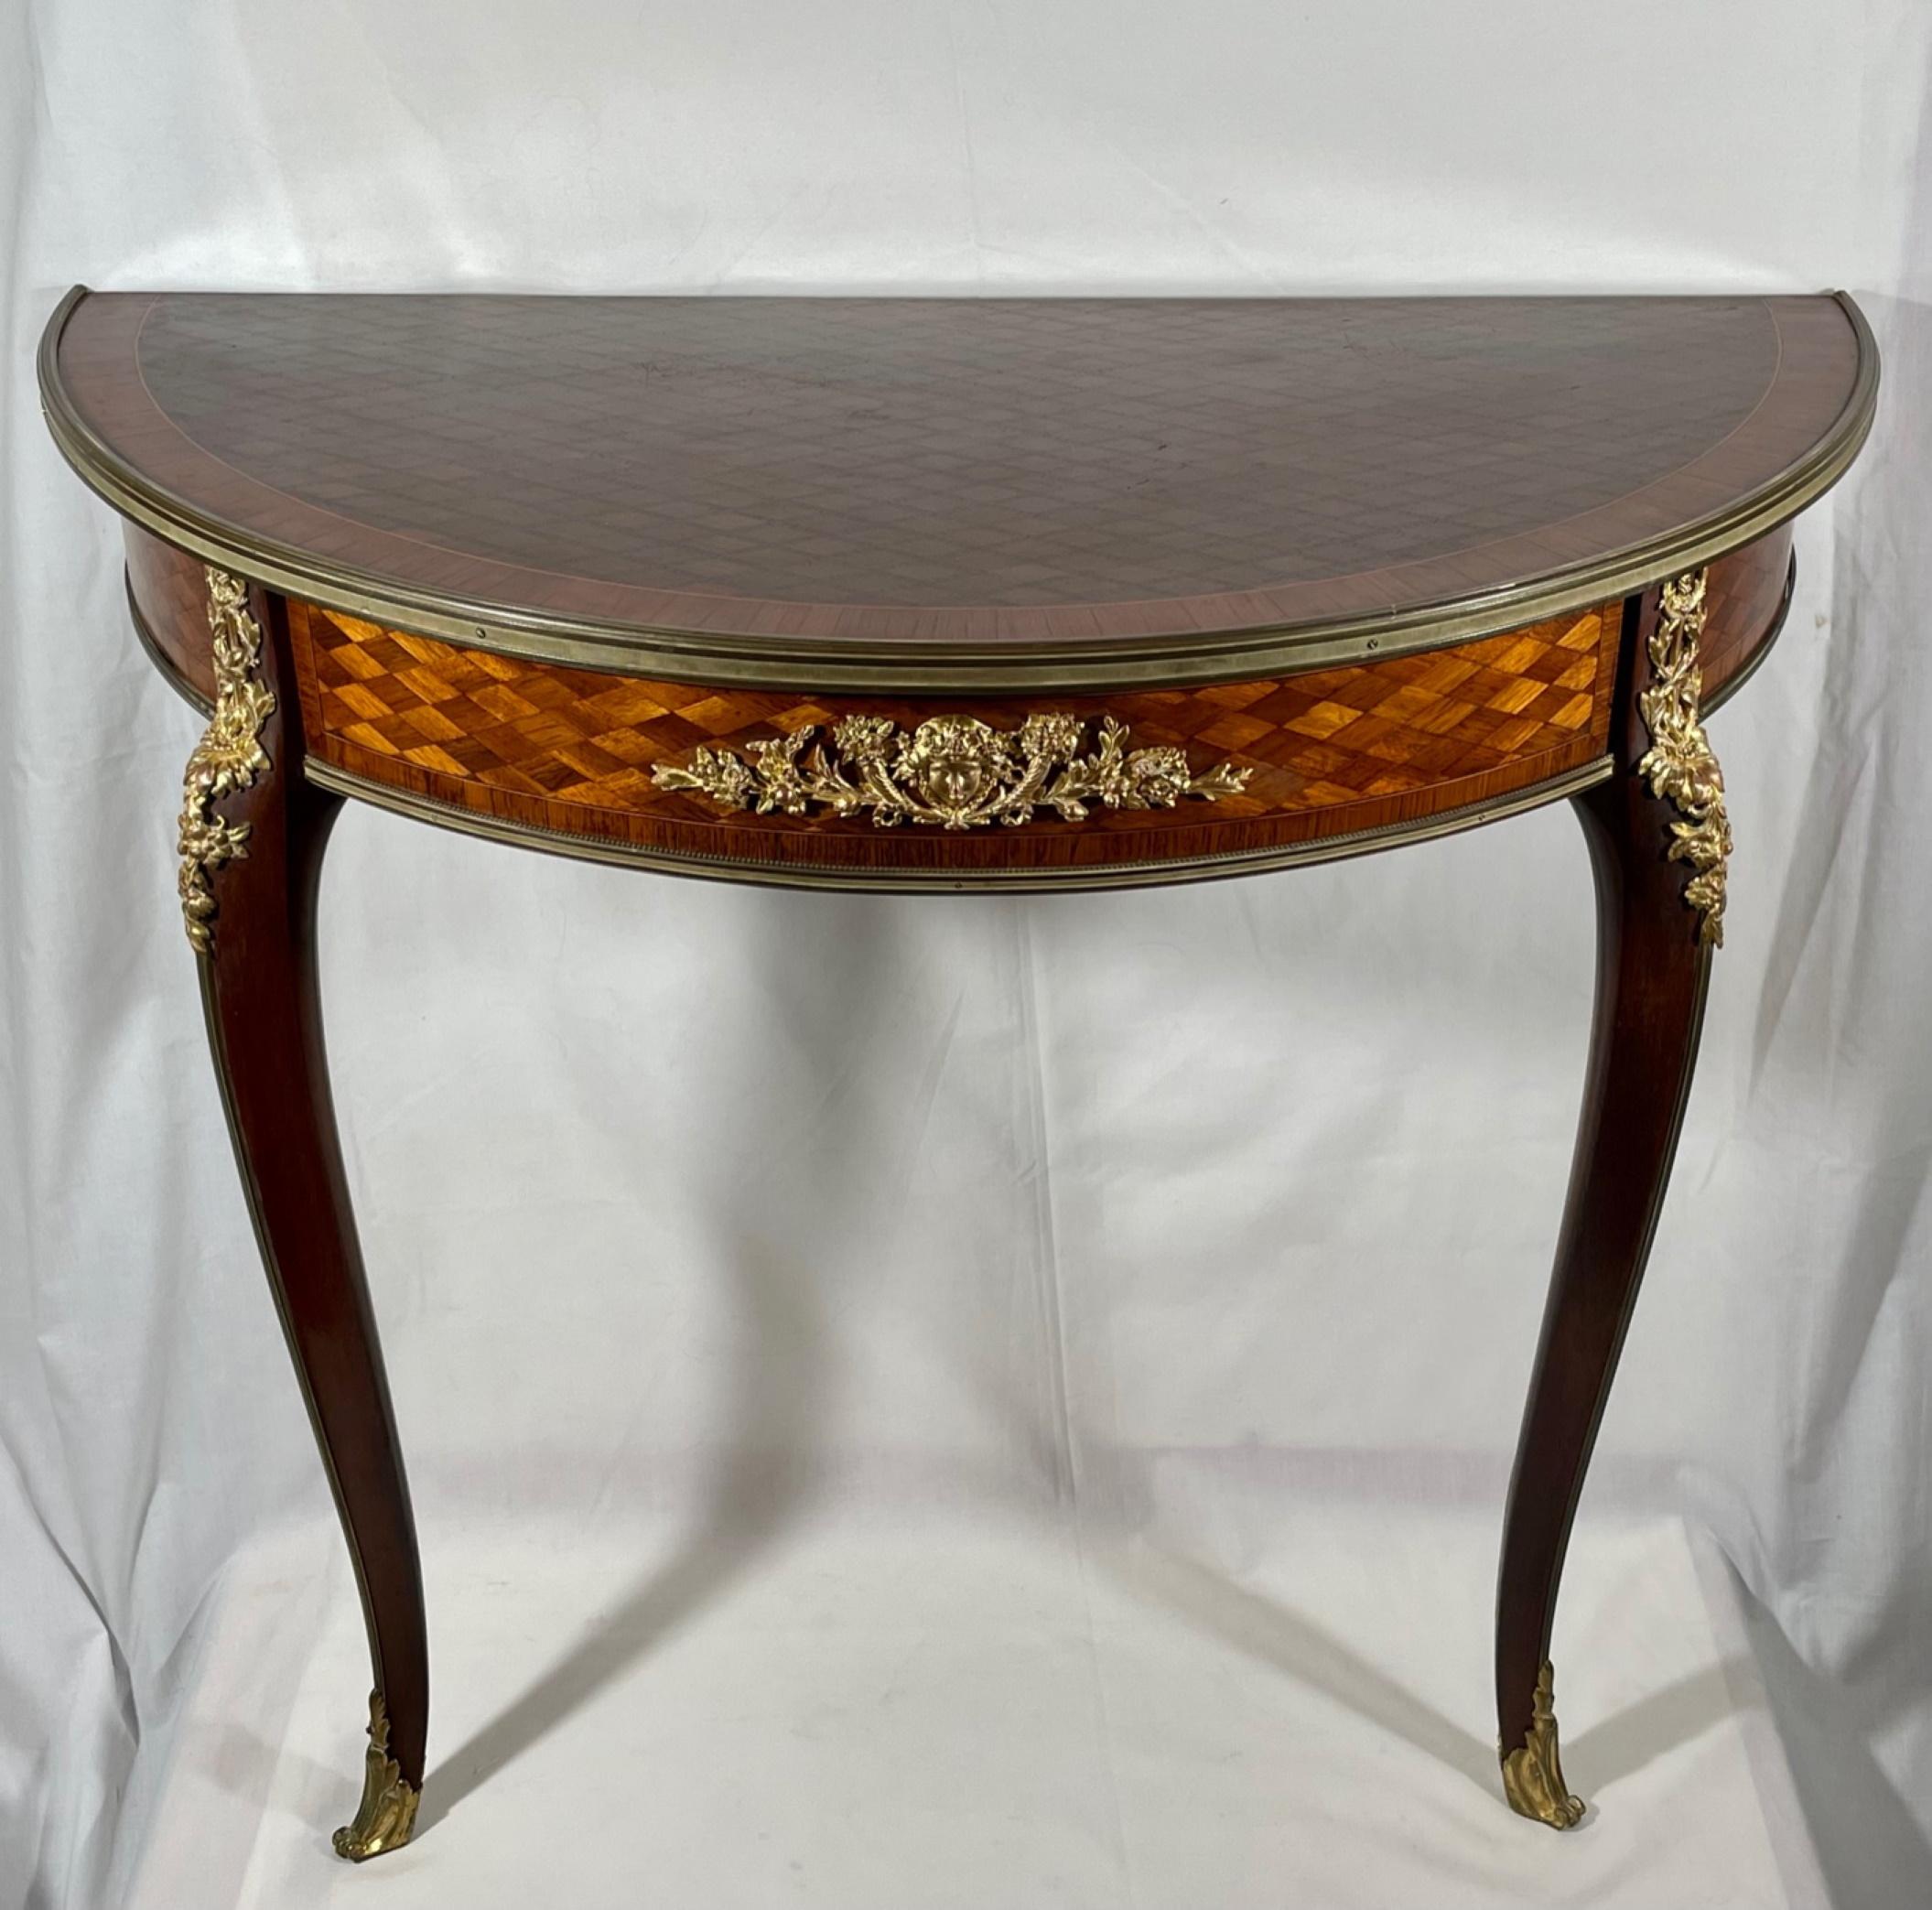 Pair of French 19th C. Francoise Linke Louis XV style ormolu mounted mahogany
Demi-lune Consoles. 

An elegant pair of French 19th century Louis XV style ormolu mounted and parquetry inlaid demi-lune consoles by Francois Linke (1855-1946). Raised